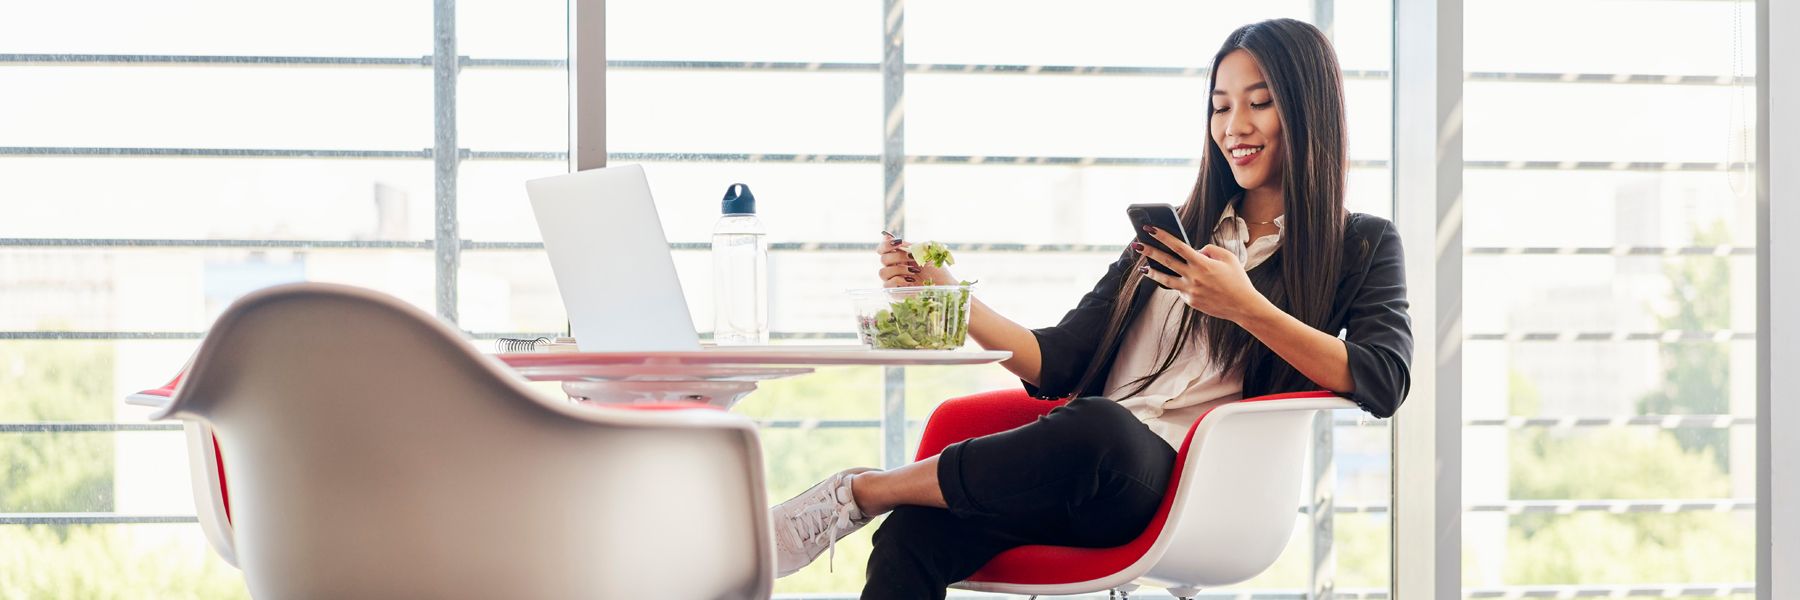 Business woman using phone and eating salad